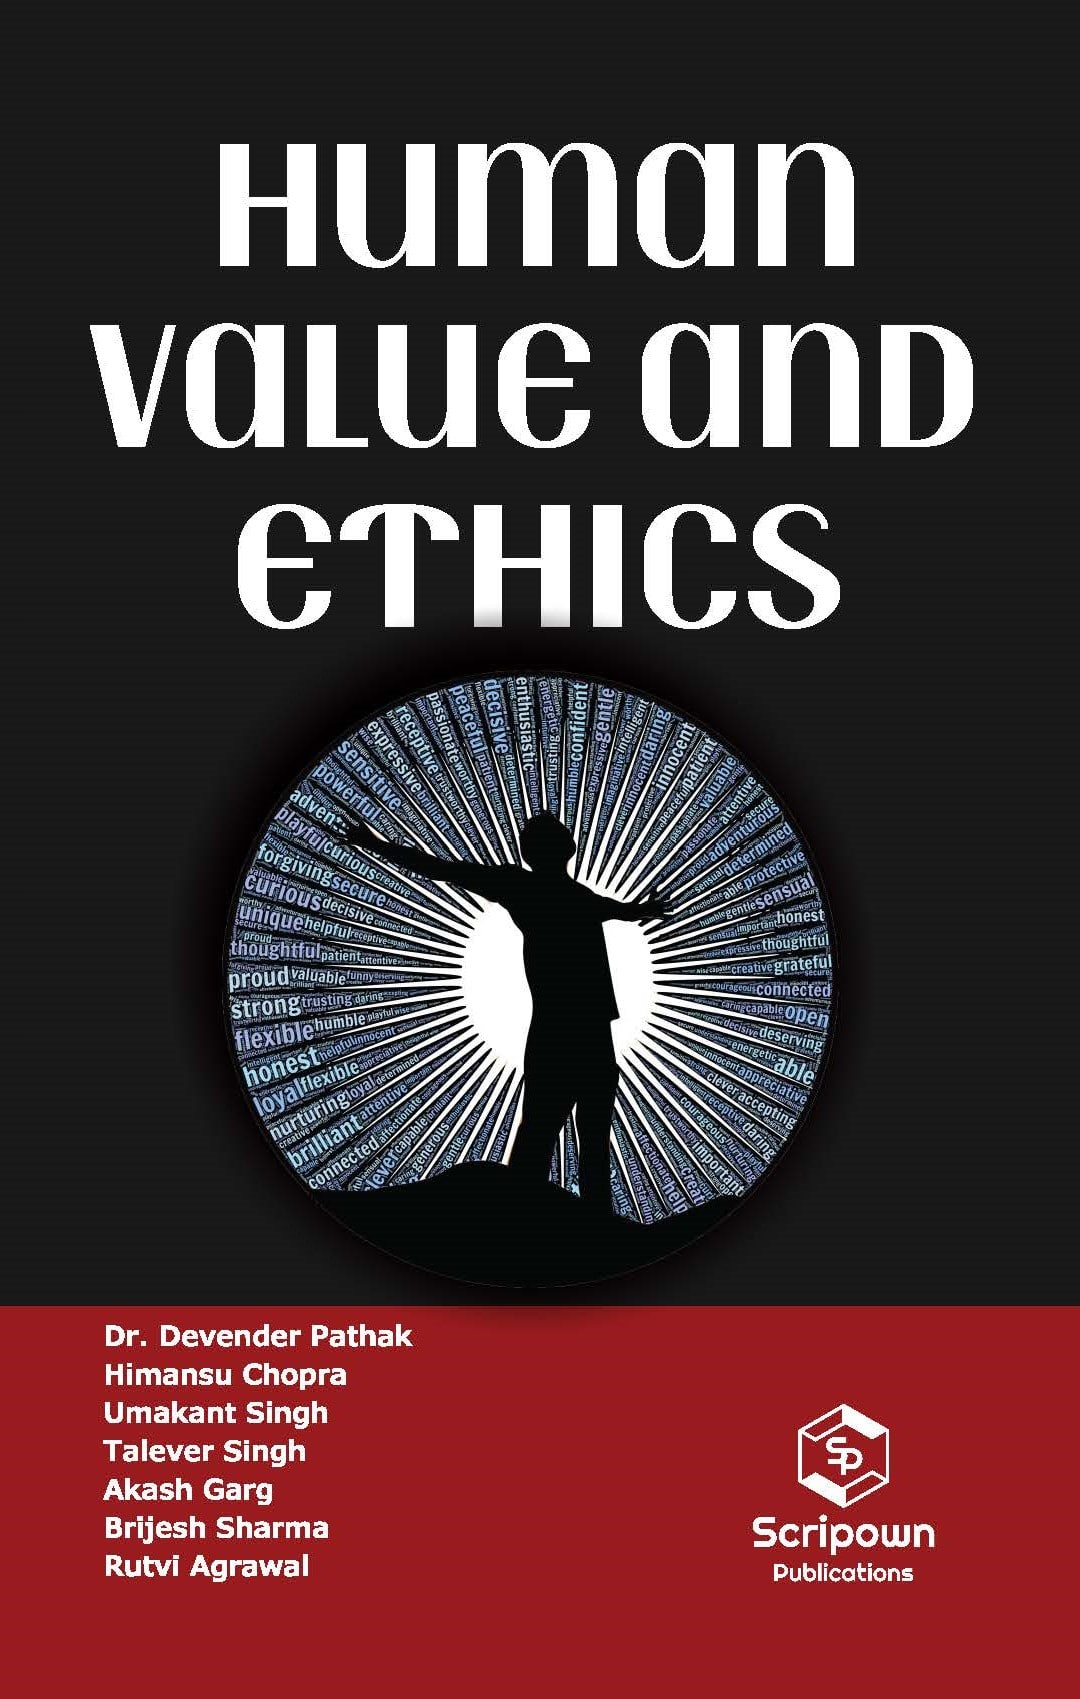 Human Value and Ethics